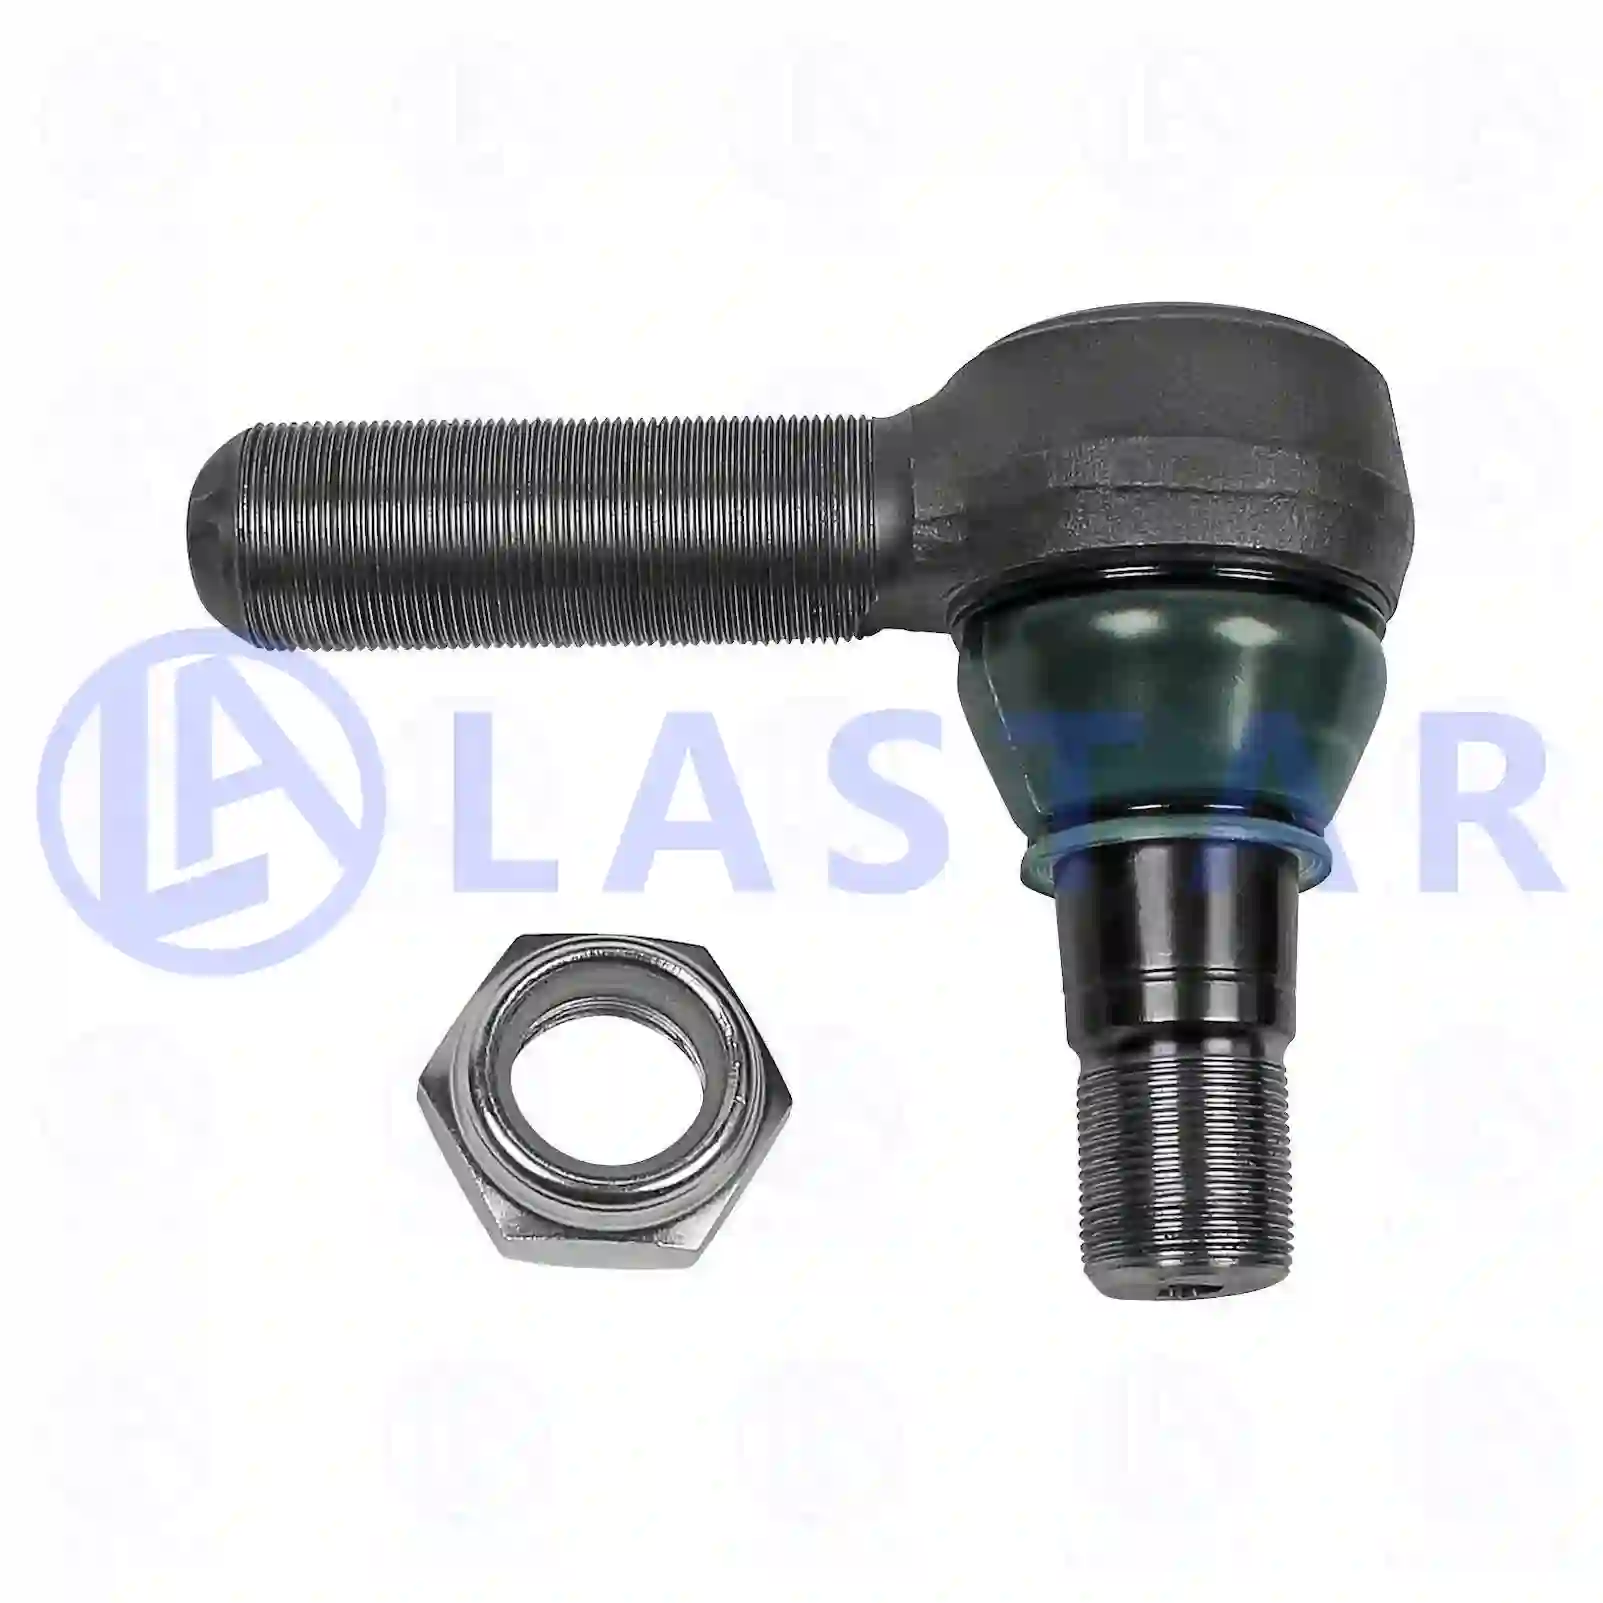 Drag Link Ball joint, right hand thread, la no: 77705370 ,  oem no:404P892H23, 81953016324, 0004605748, 0004606048, 0004606848, 0004607048, 0004607548, 0014600448, 0014601148, 0014601748, 0014602448, 0014607648, 0014609648, AN85778002, ZG40391-0008 Lastar Spare Part | Truck Spare Parts, Auotomotive Spare Parts